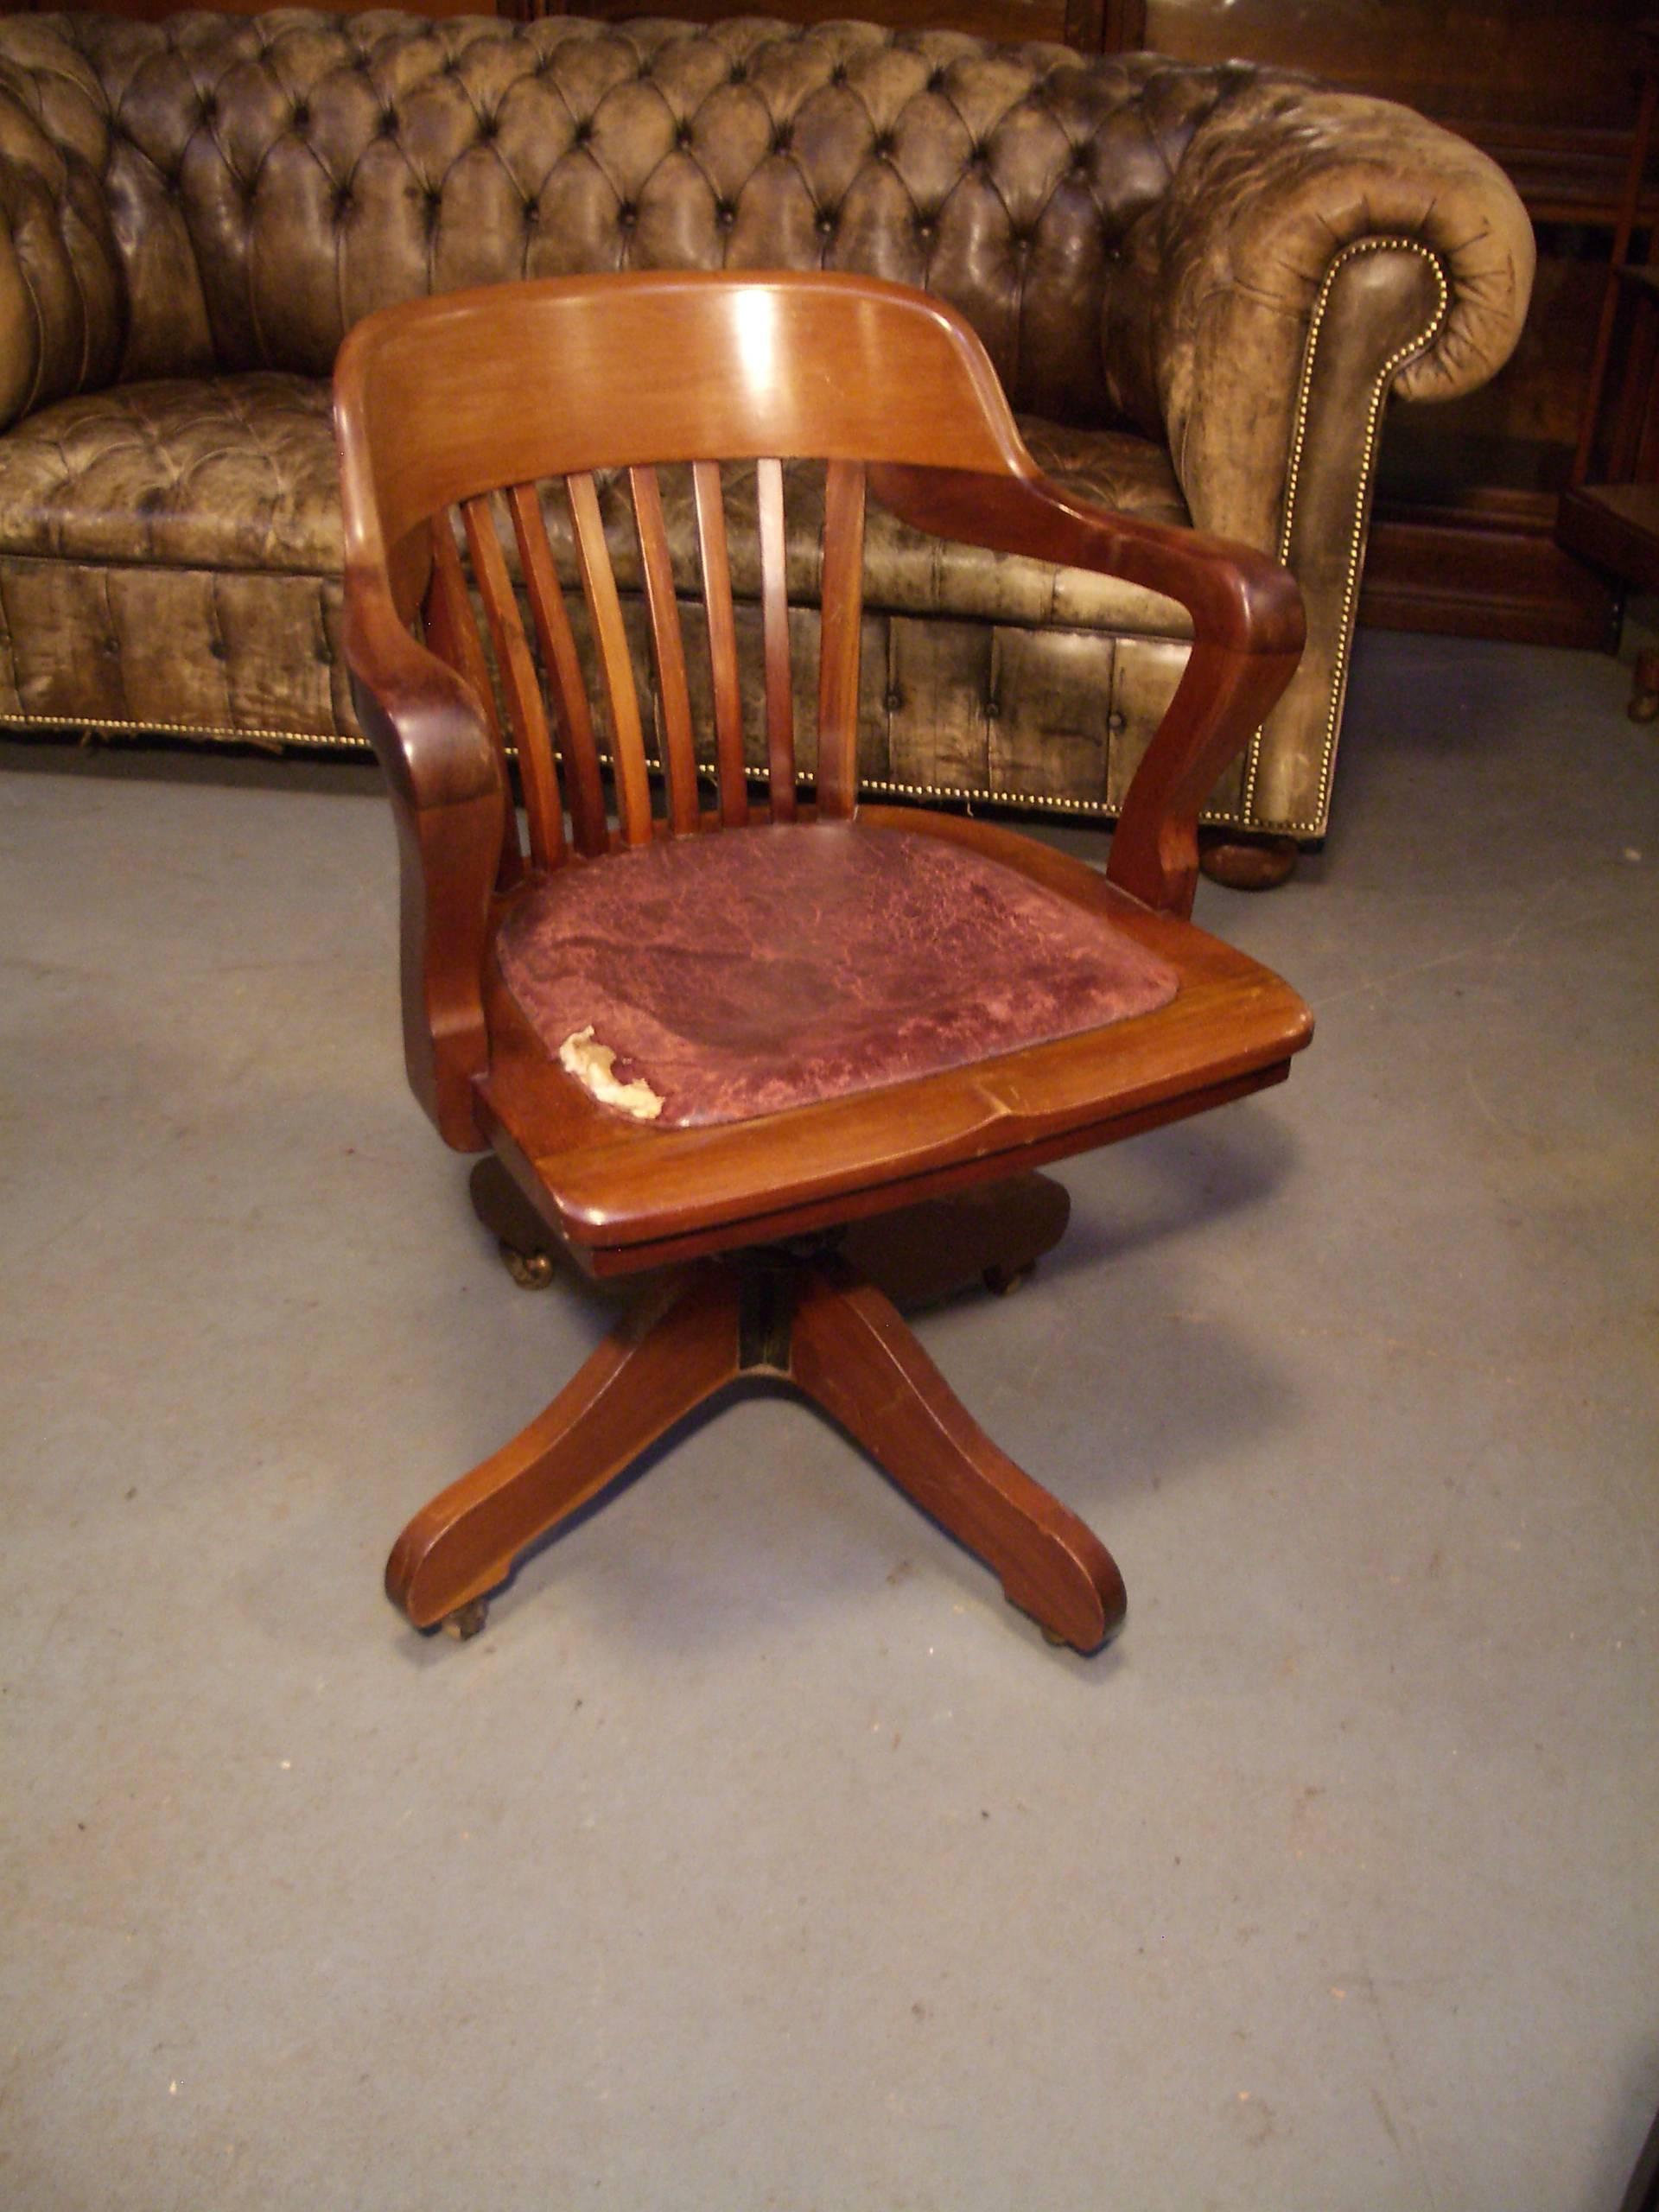 Beautiful antique mahogany office chair in perfect condition. The seat is adjustable in height and also has an adjustable swing mechanism. Seat will completely be renewed incl. Interior, and leather of choice. Very stable system. Still equipped with